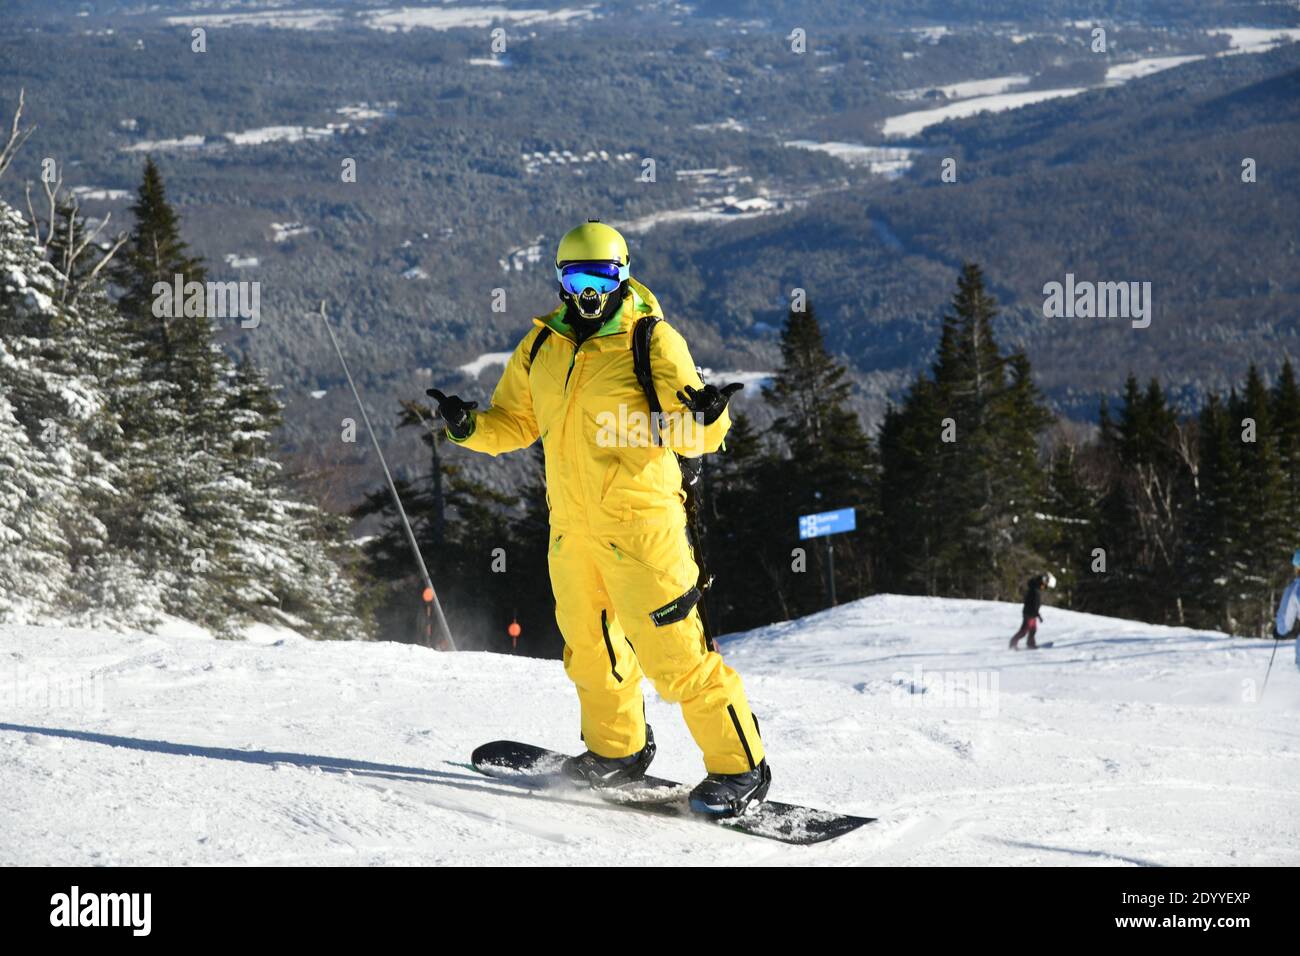 Snowboarder riding down the slopes wearing yellow mono suit on sunny day with fresh snow. Stowe mountain ski resort, VT 2020. Hi resolution image Stock Photo